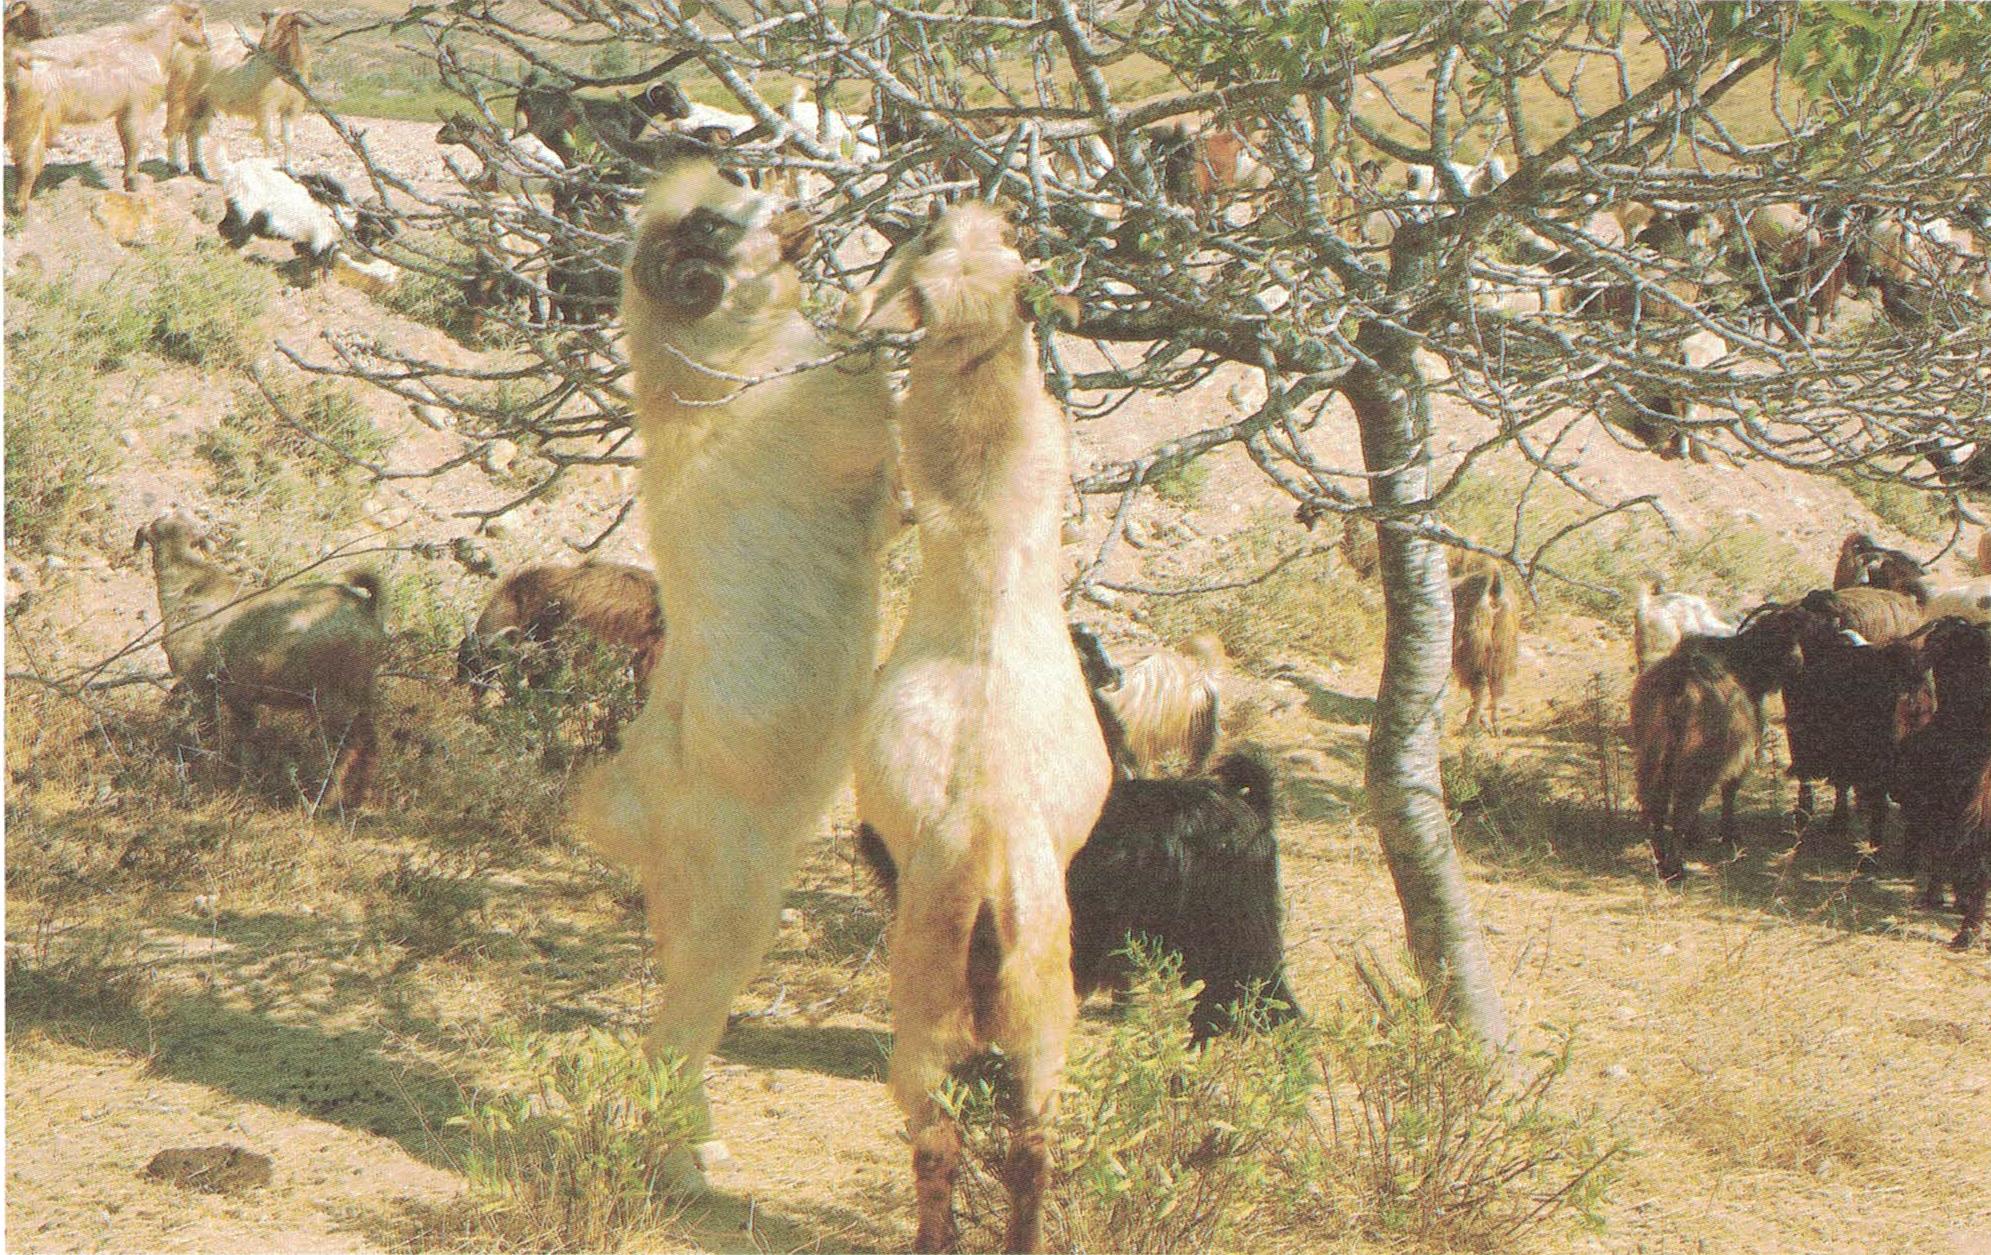 a picture of goats standing on their hind legs eating tree leaves